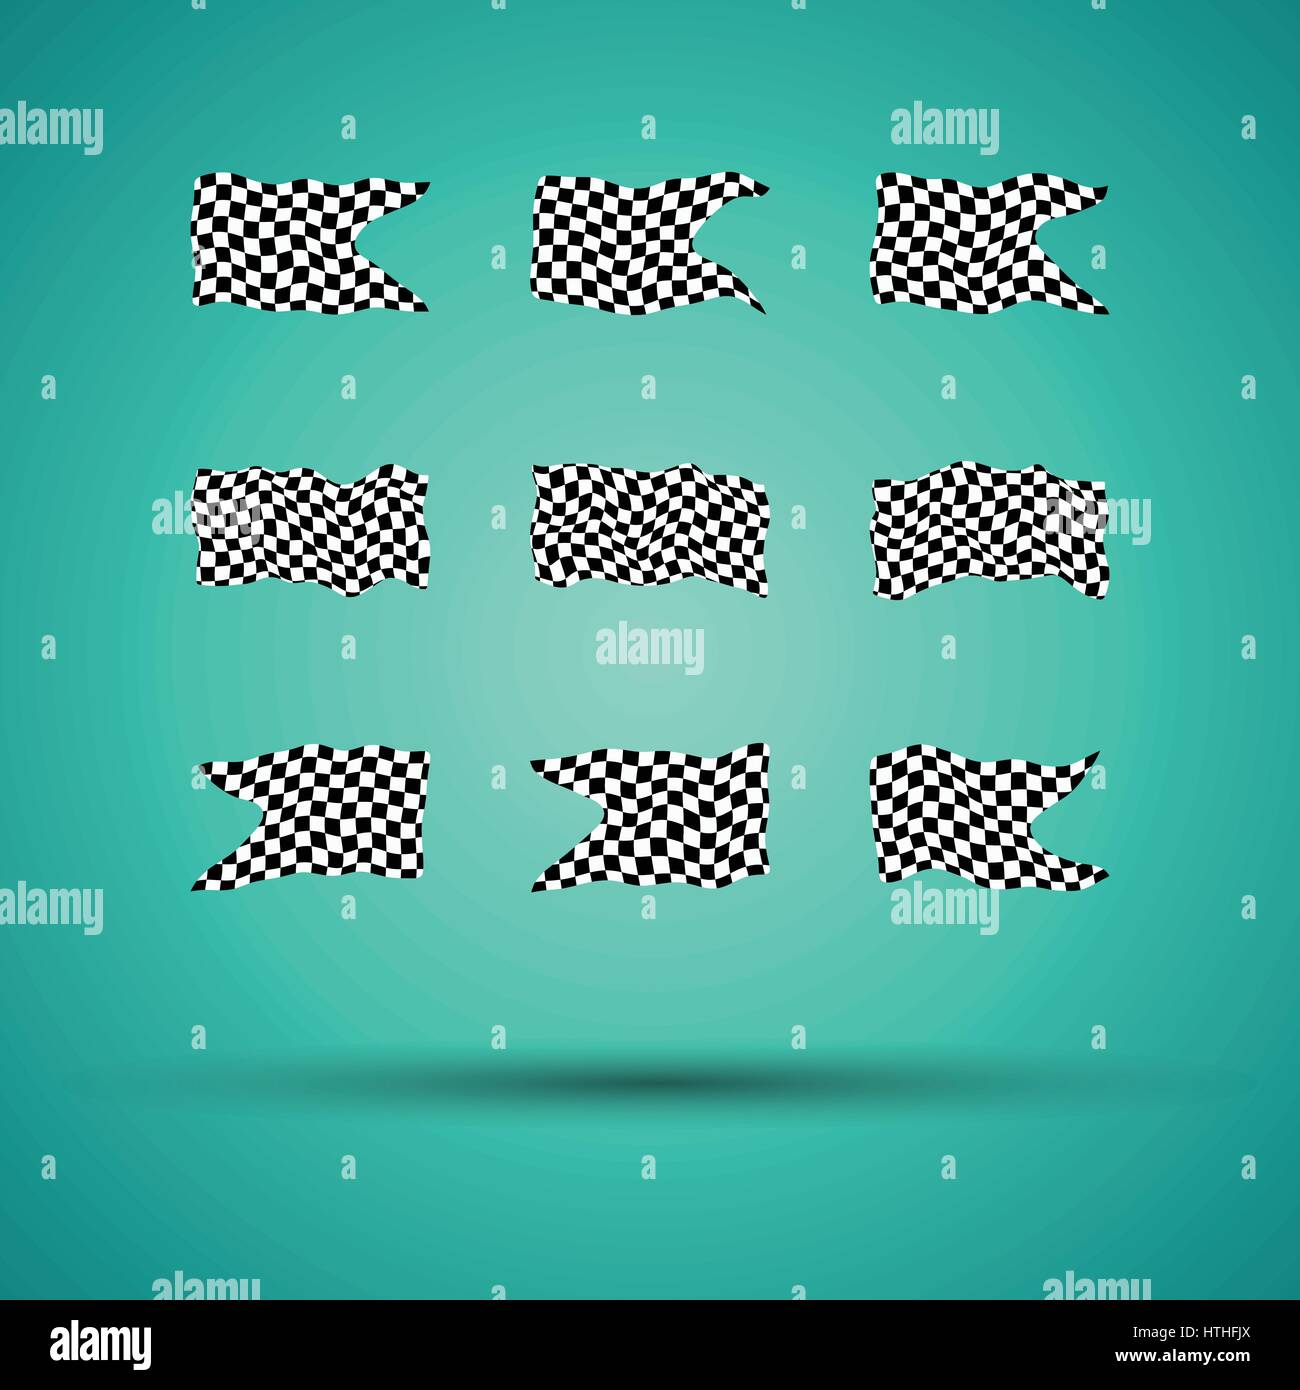 Racing background set collection of 9 checkered flags vector illustration. EPS10. Stock Vector